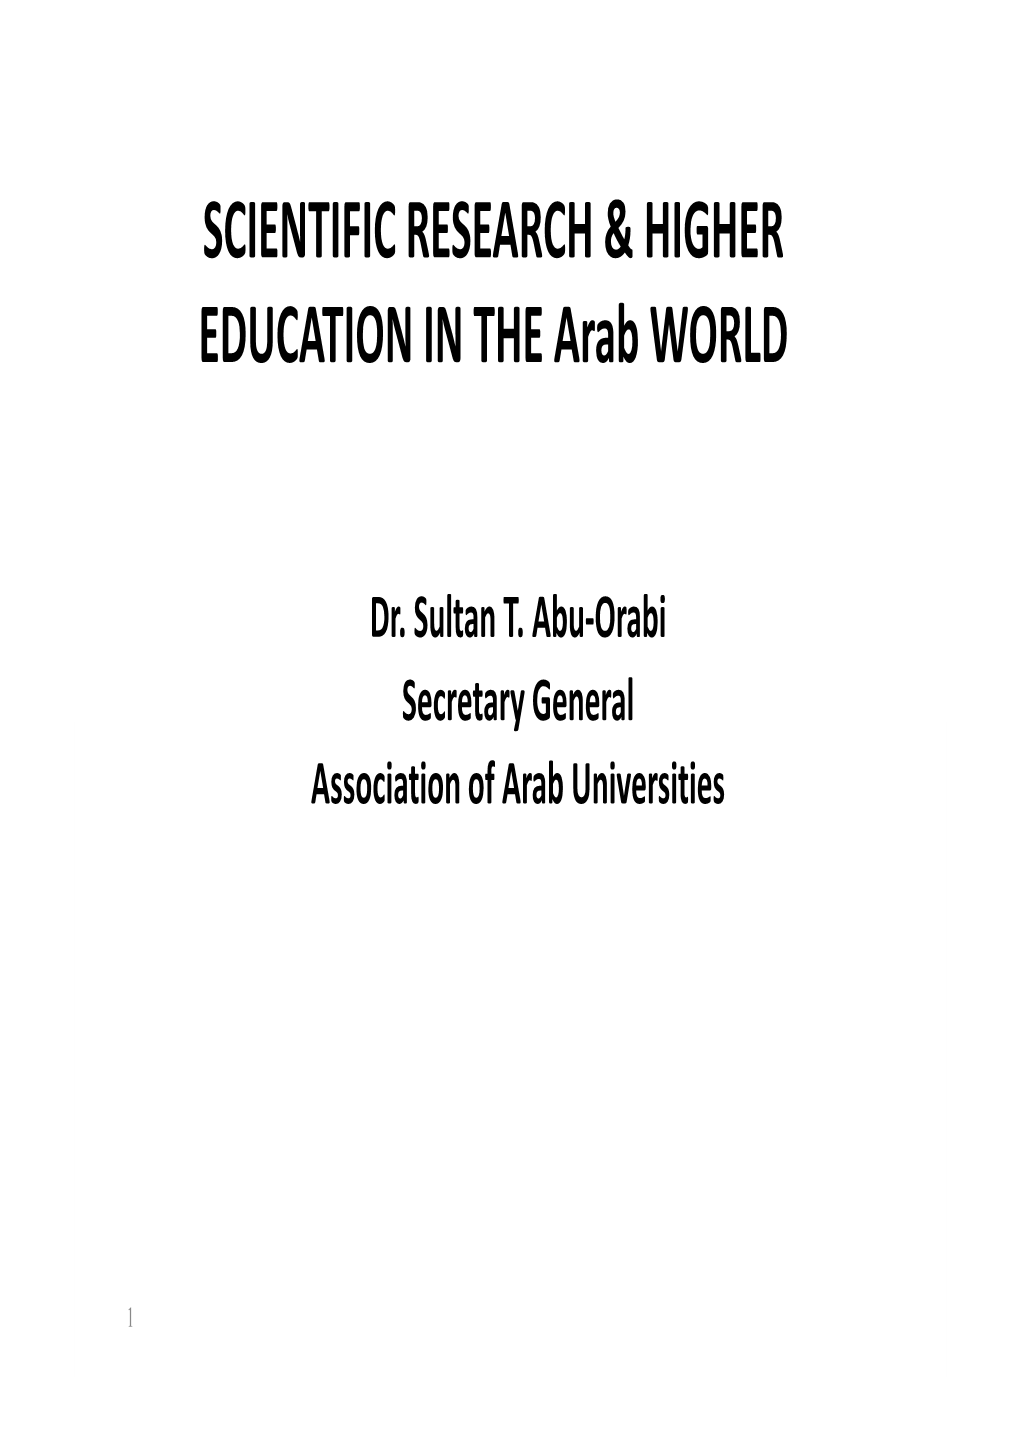 SCIENTIFIC RESEARCH & HIGHER EDUCATION in the Arab WORLD